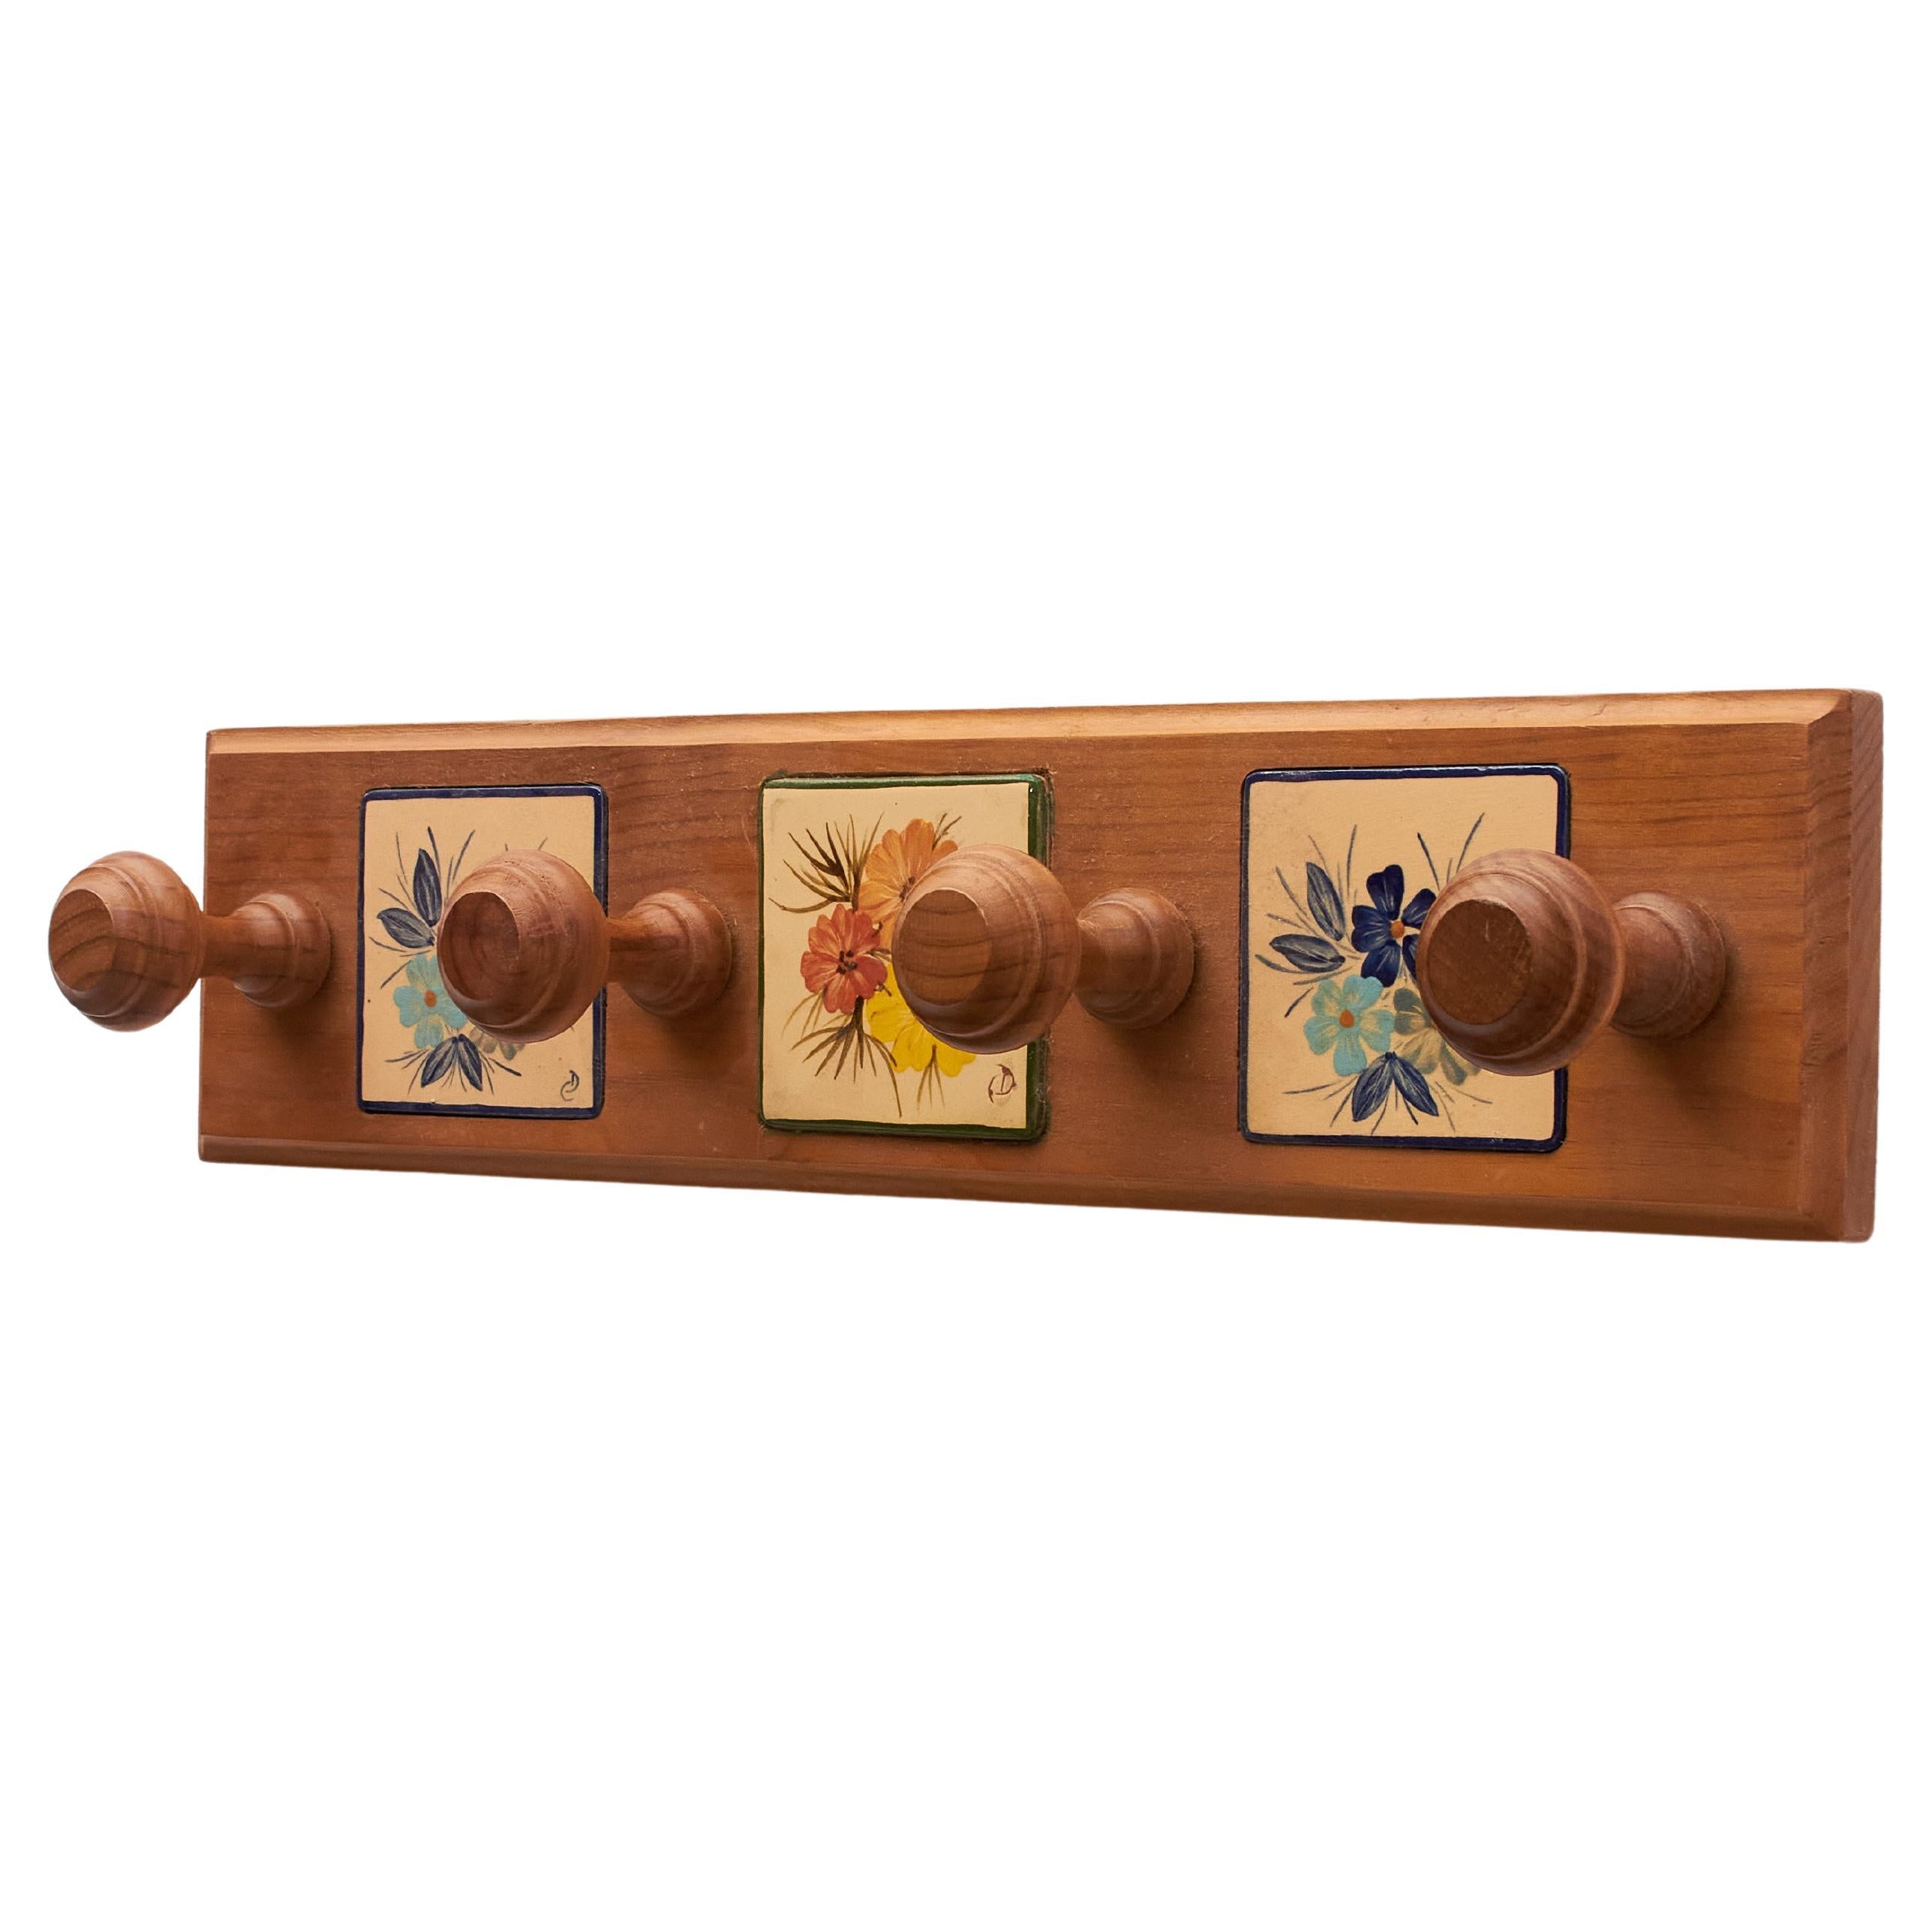 Vintage 1960 Catalan Artist Diaz Costa Hand-Painted Ceramic and Wood Hanger For Sale